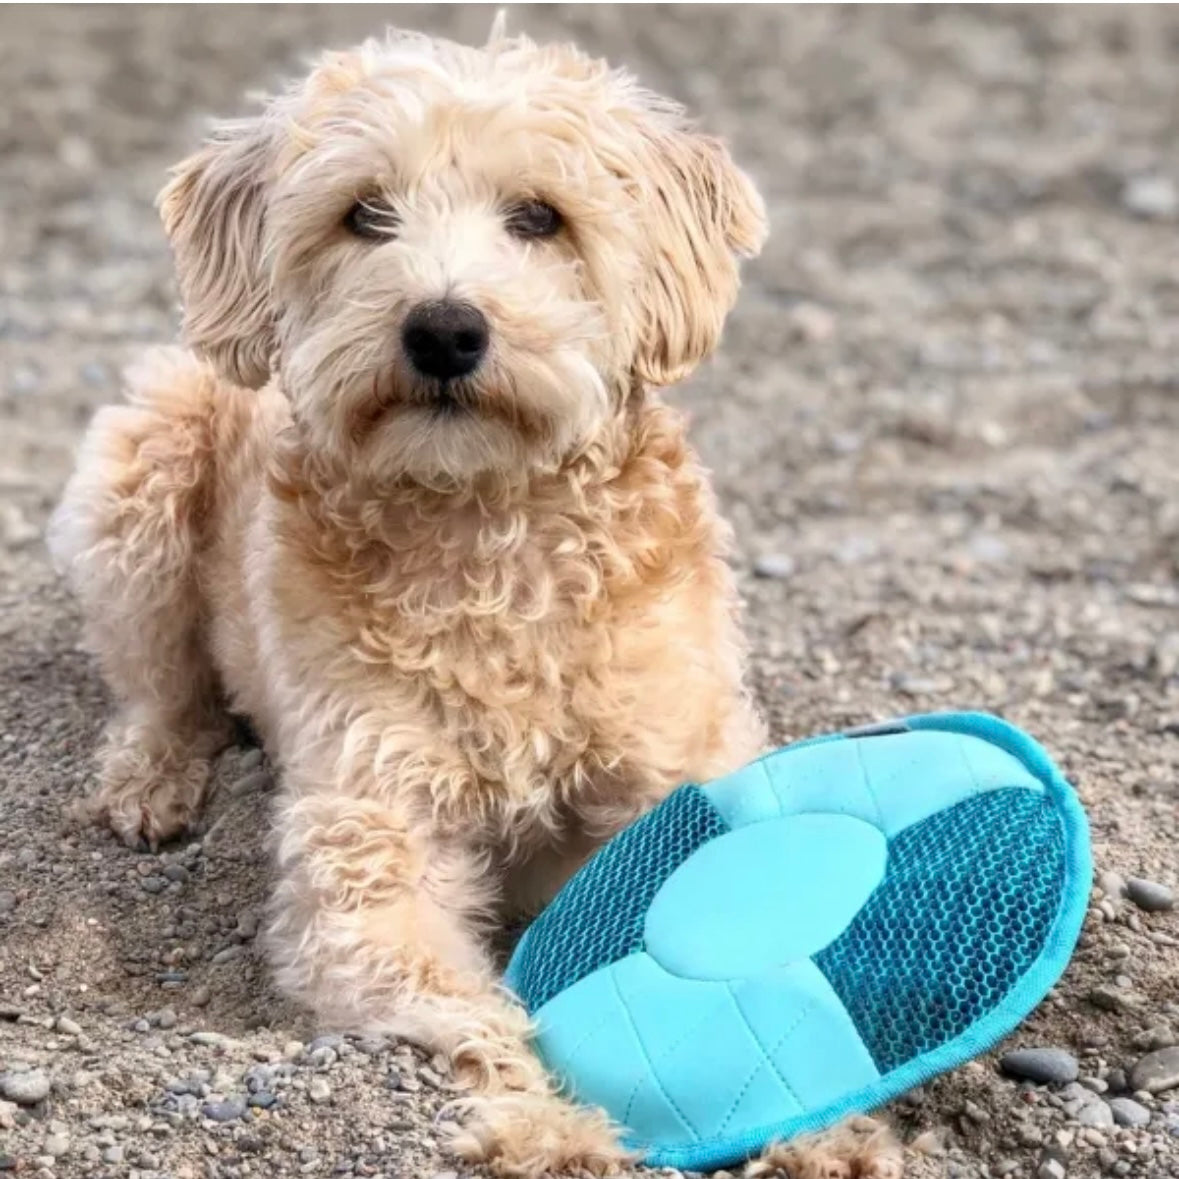 8" Mesh Frisbee Dog Toy By fouFIT - Floats & Squeaks!